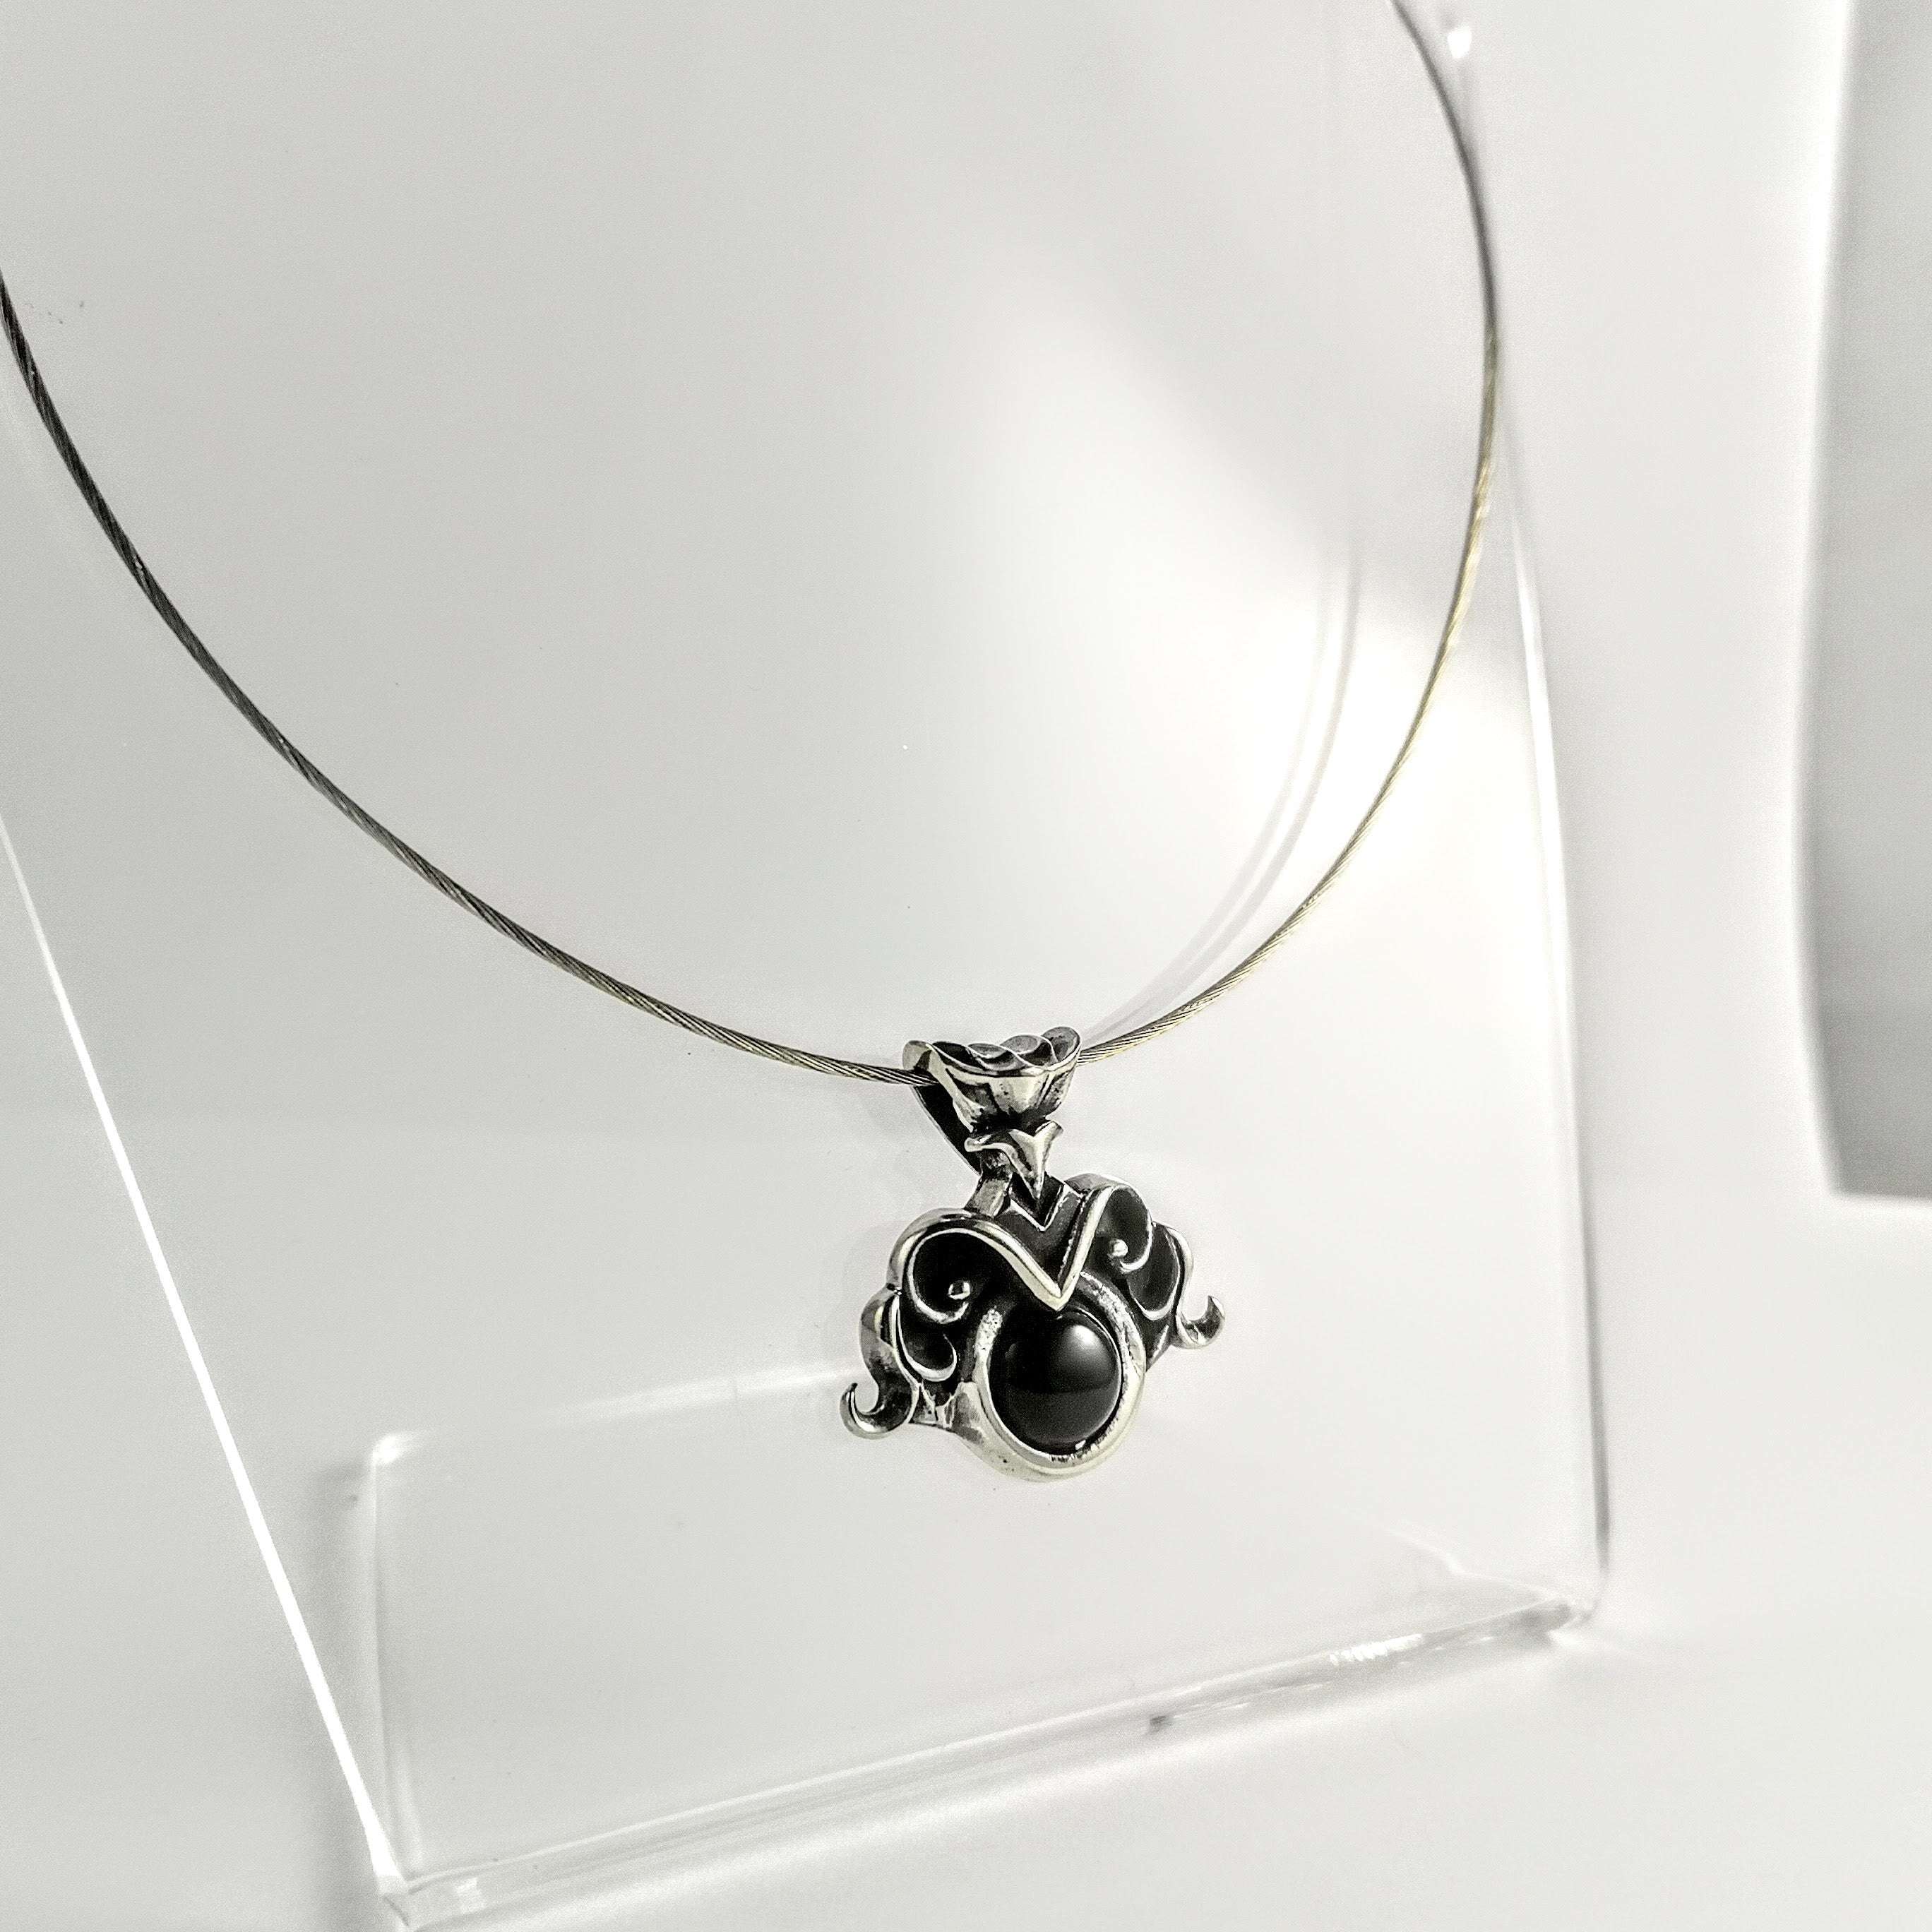 Endearing Sterling Silver Ornate Pendant with Black Onyx Stone